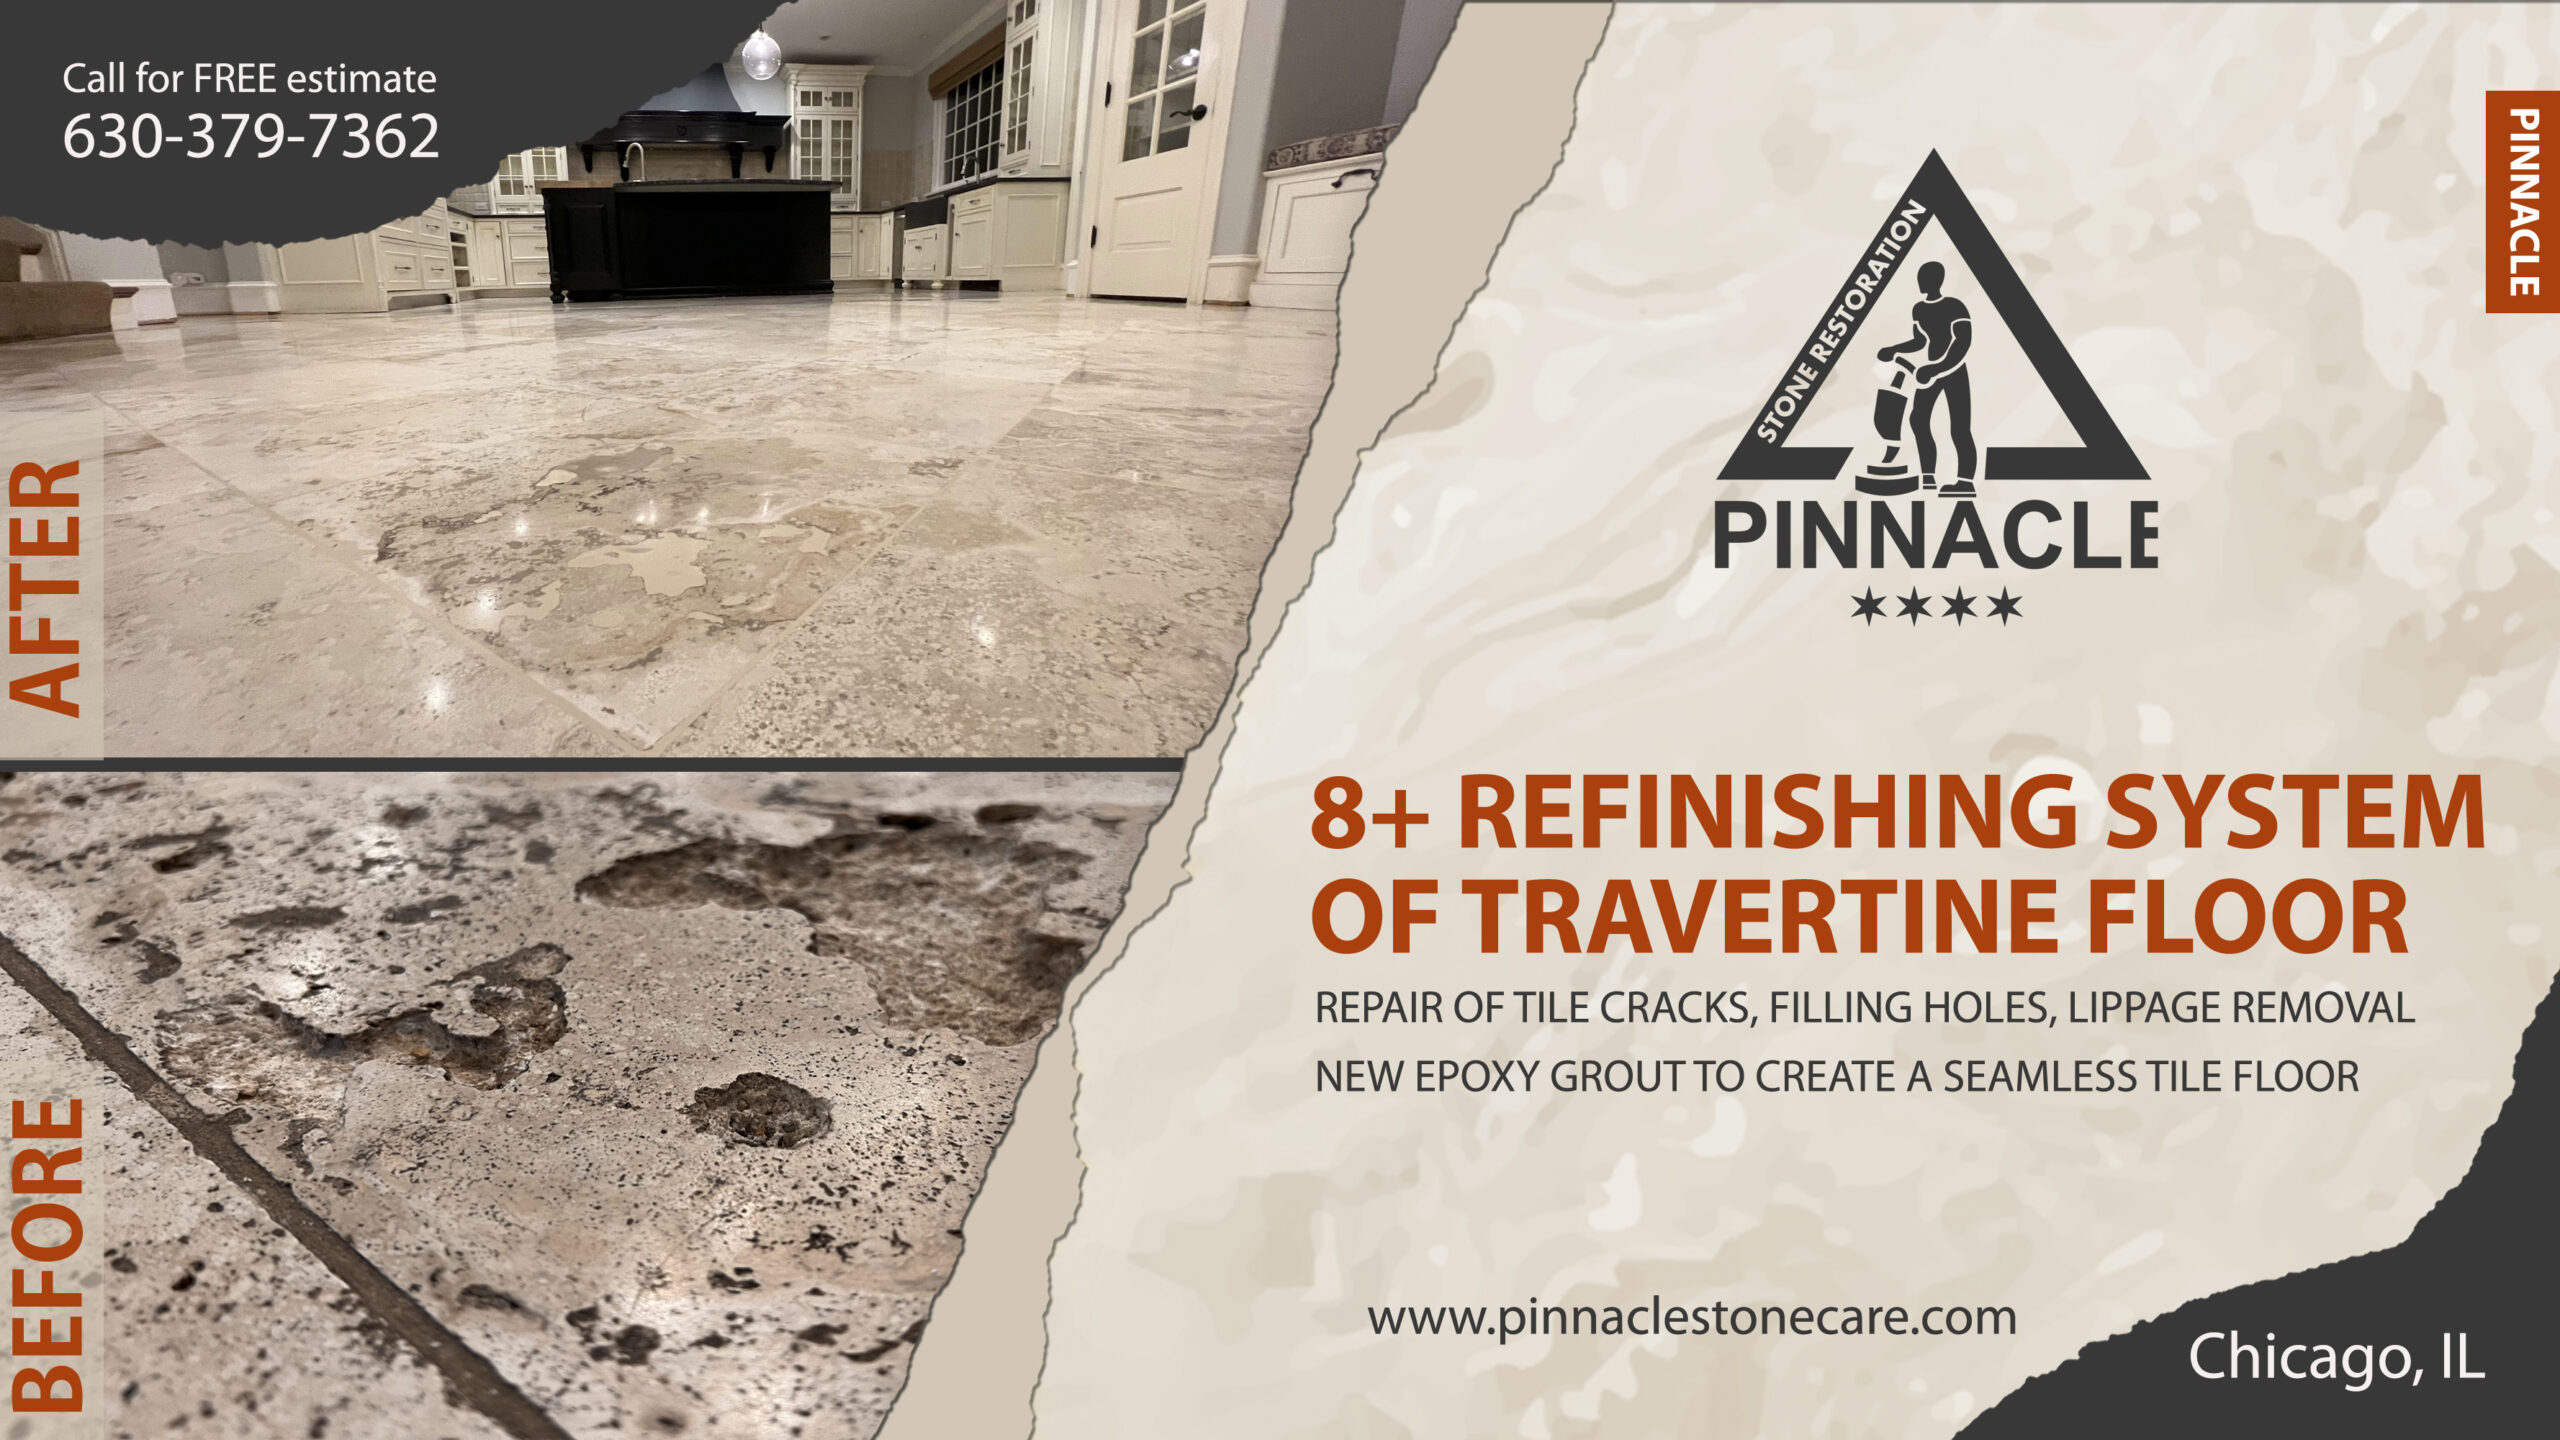 8+ refinishing system and repair of travertine tile floor. Repair of cracked tiles, filling holes, new epoxy grout, tile lippage removal and polishing to create a seamless floor